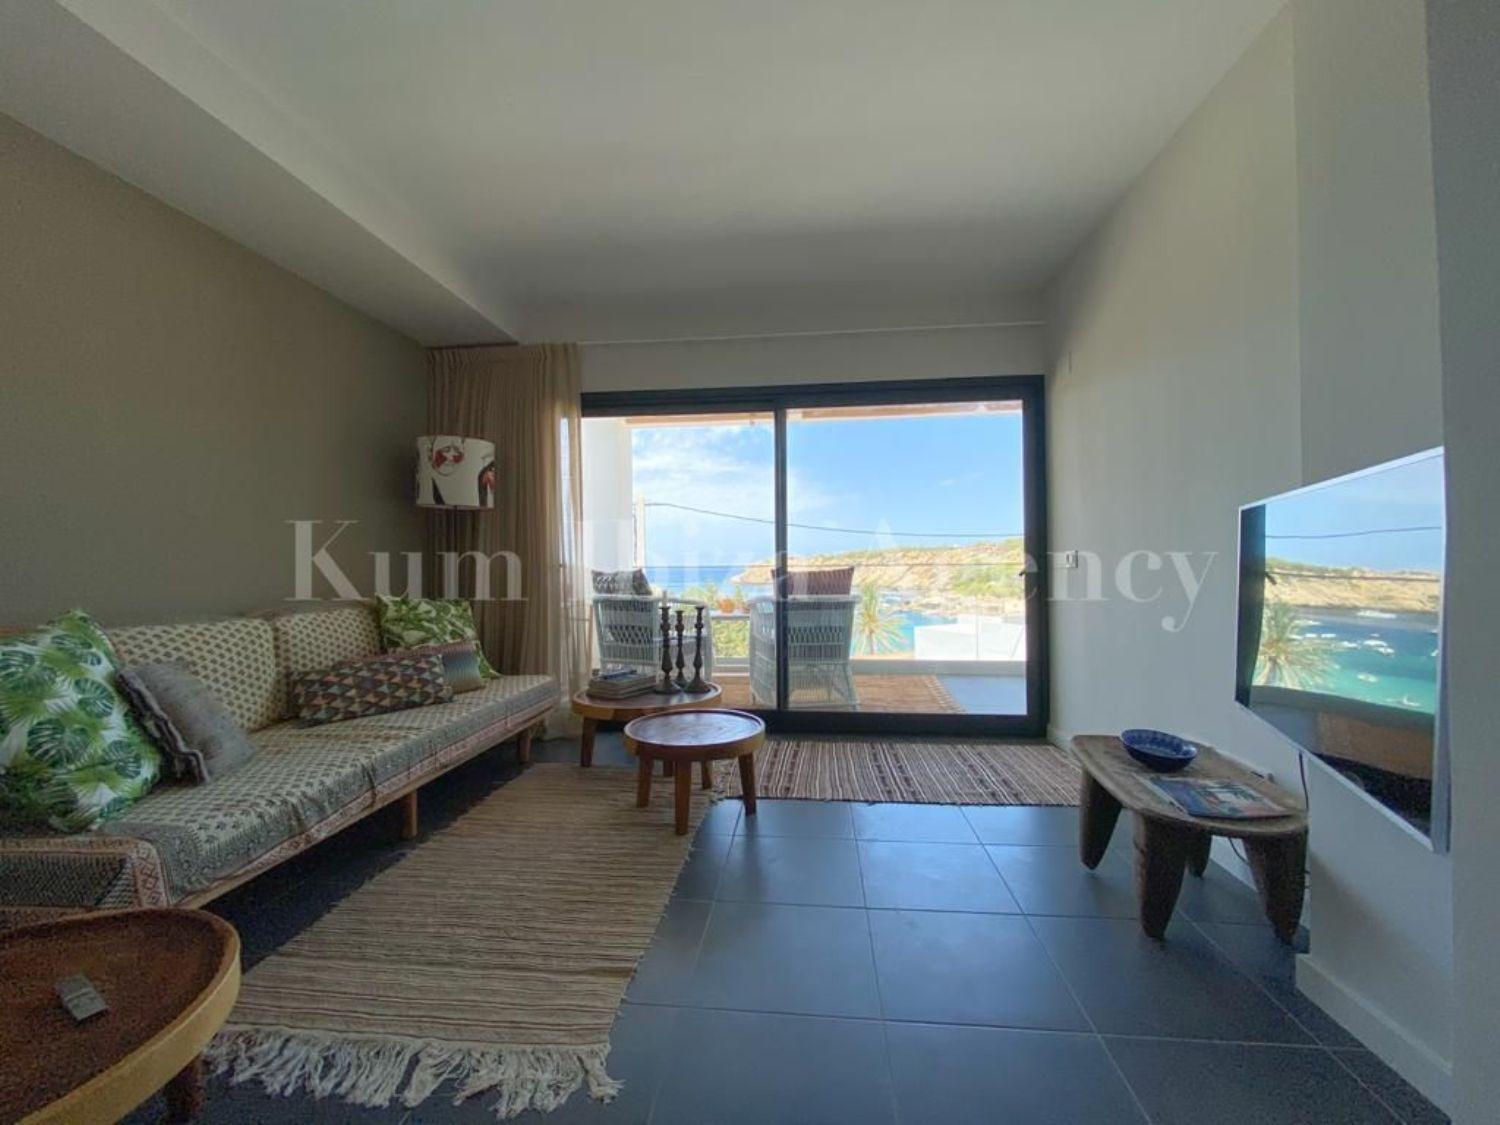 Apartment for rent with sea views.